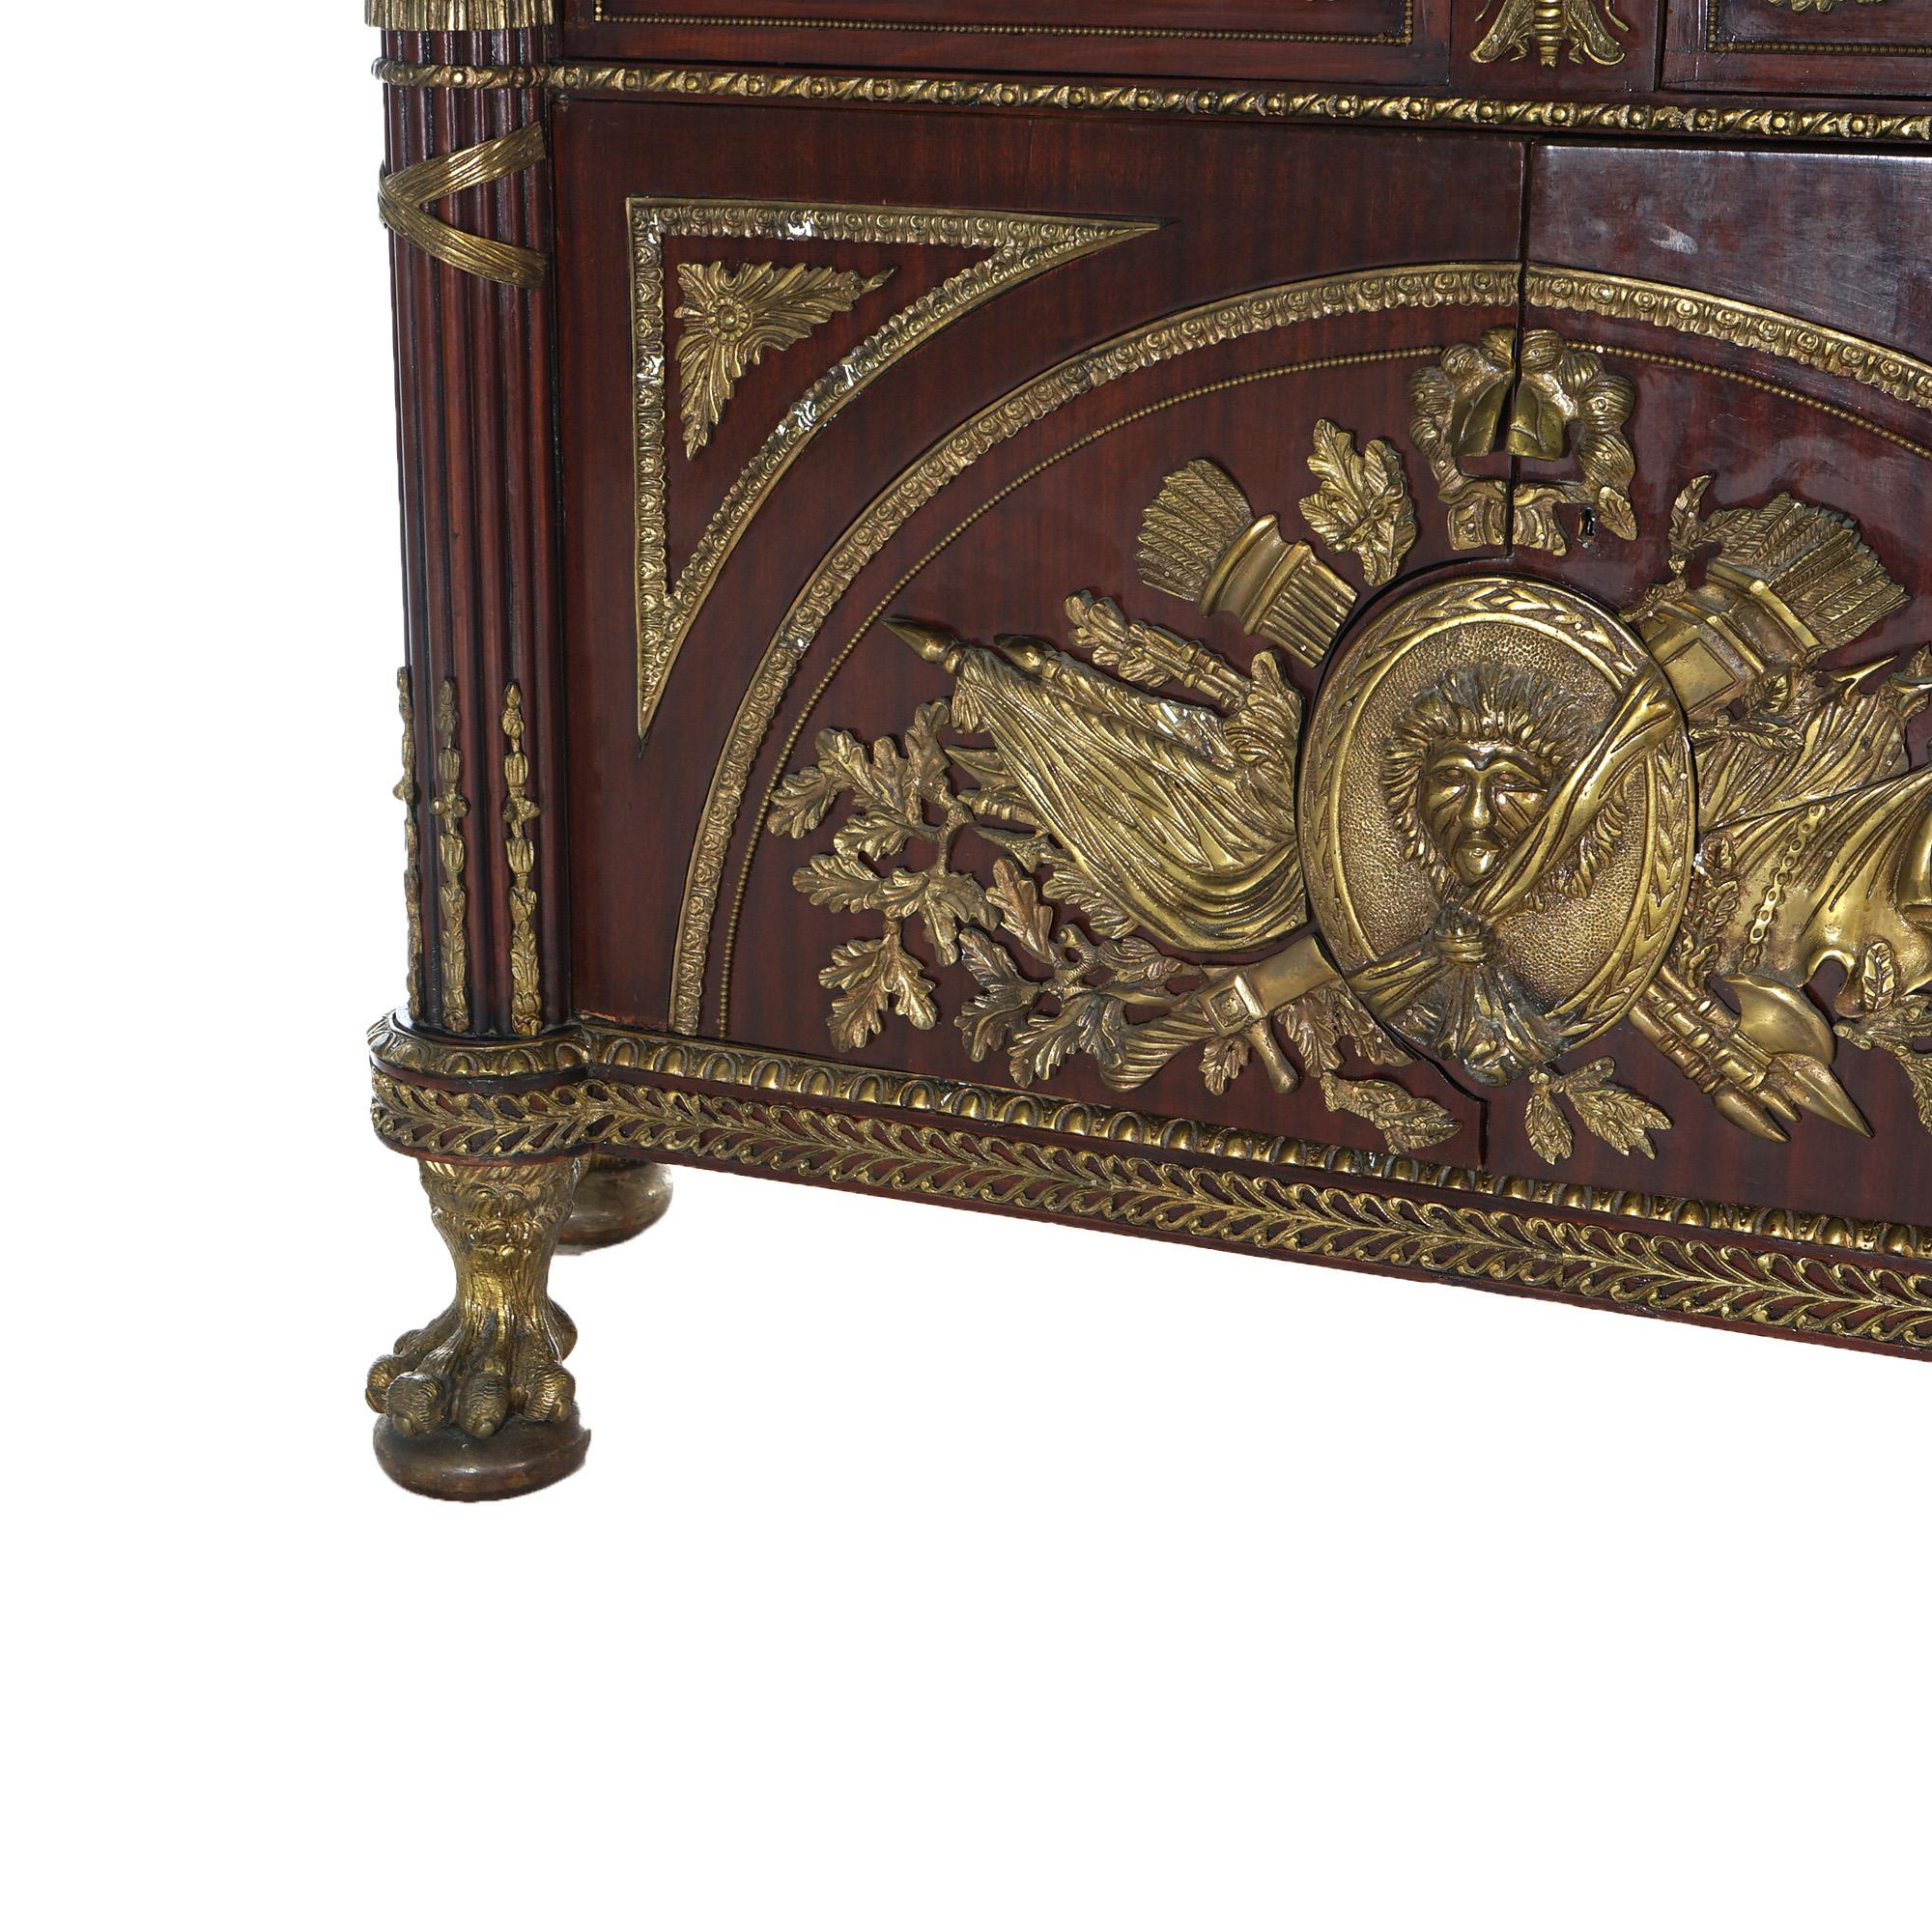 20th Century French Empire Style Kingwood Marble Top Sideboard with Ormolu Mounts, 20th C